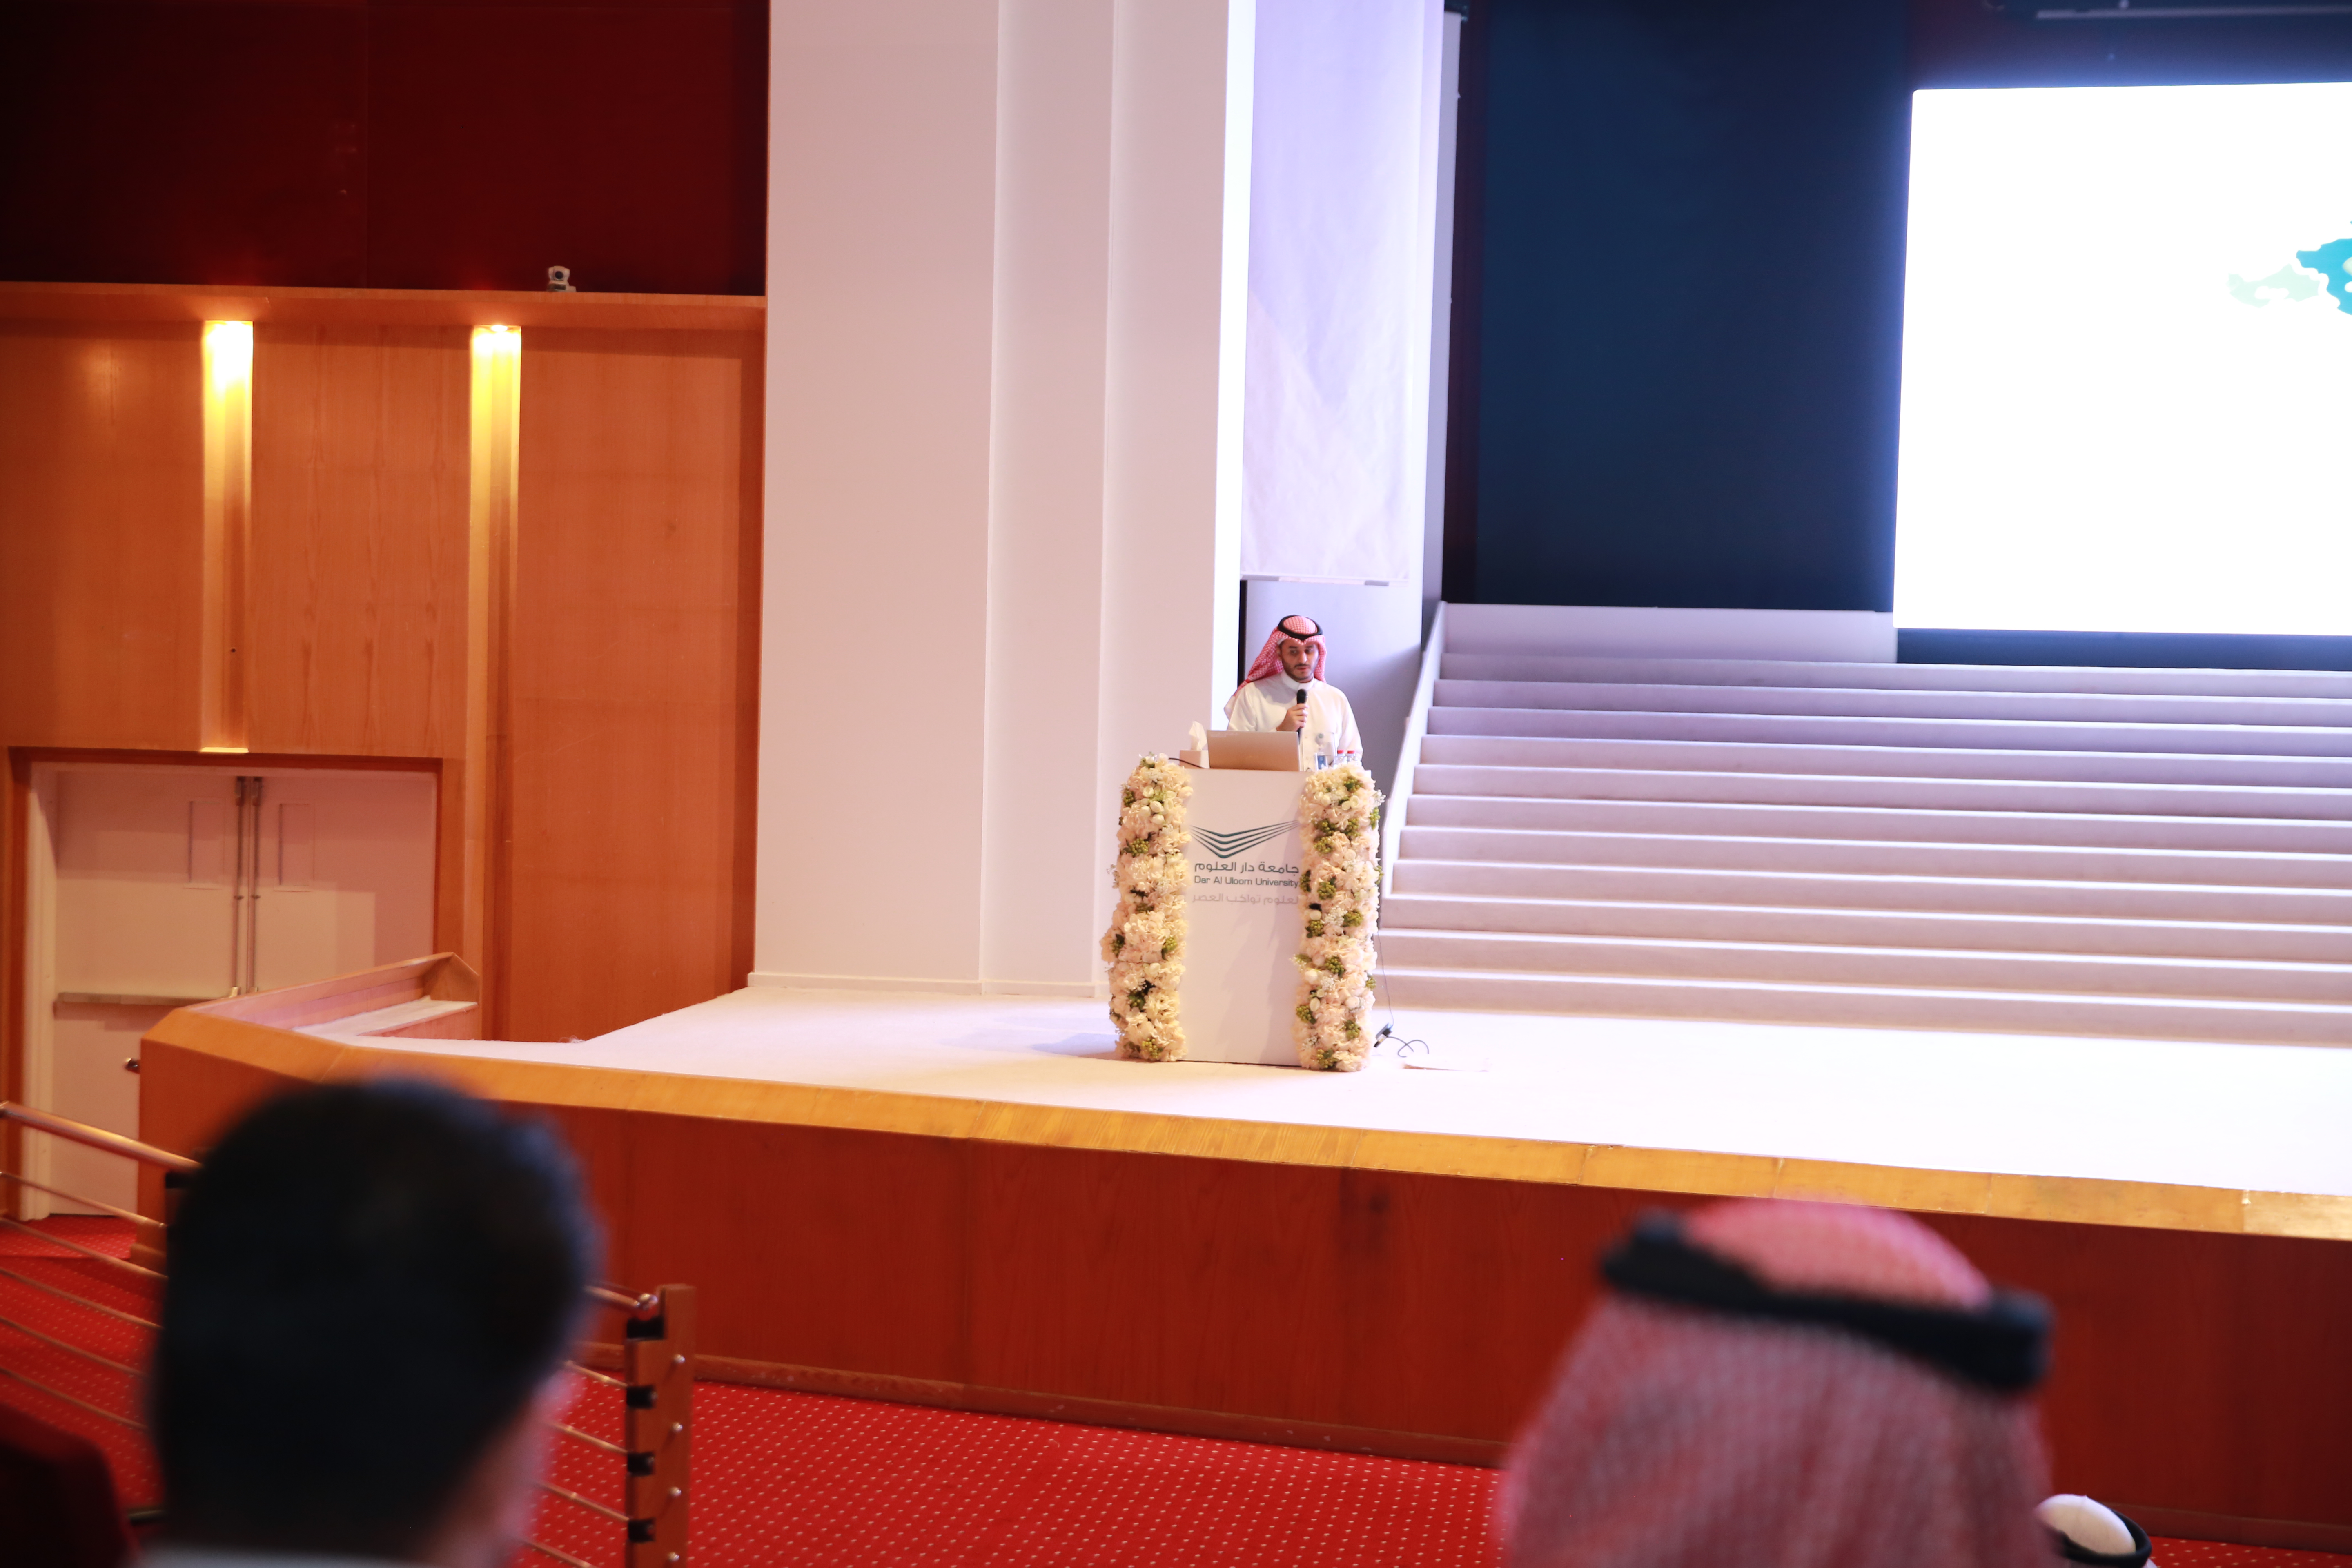 College of Business Administration hosted the General Secretariat of Zakat, Tax and Customs Committees